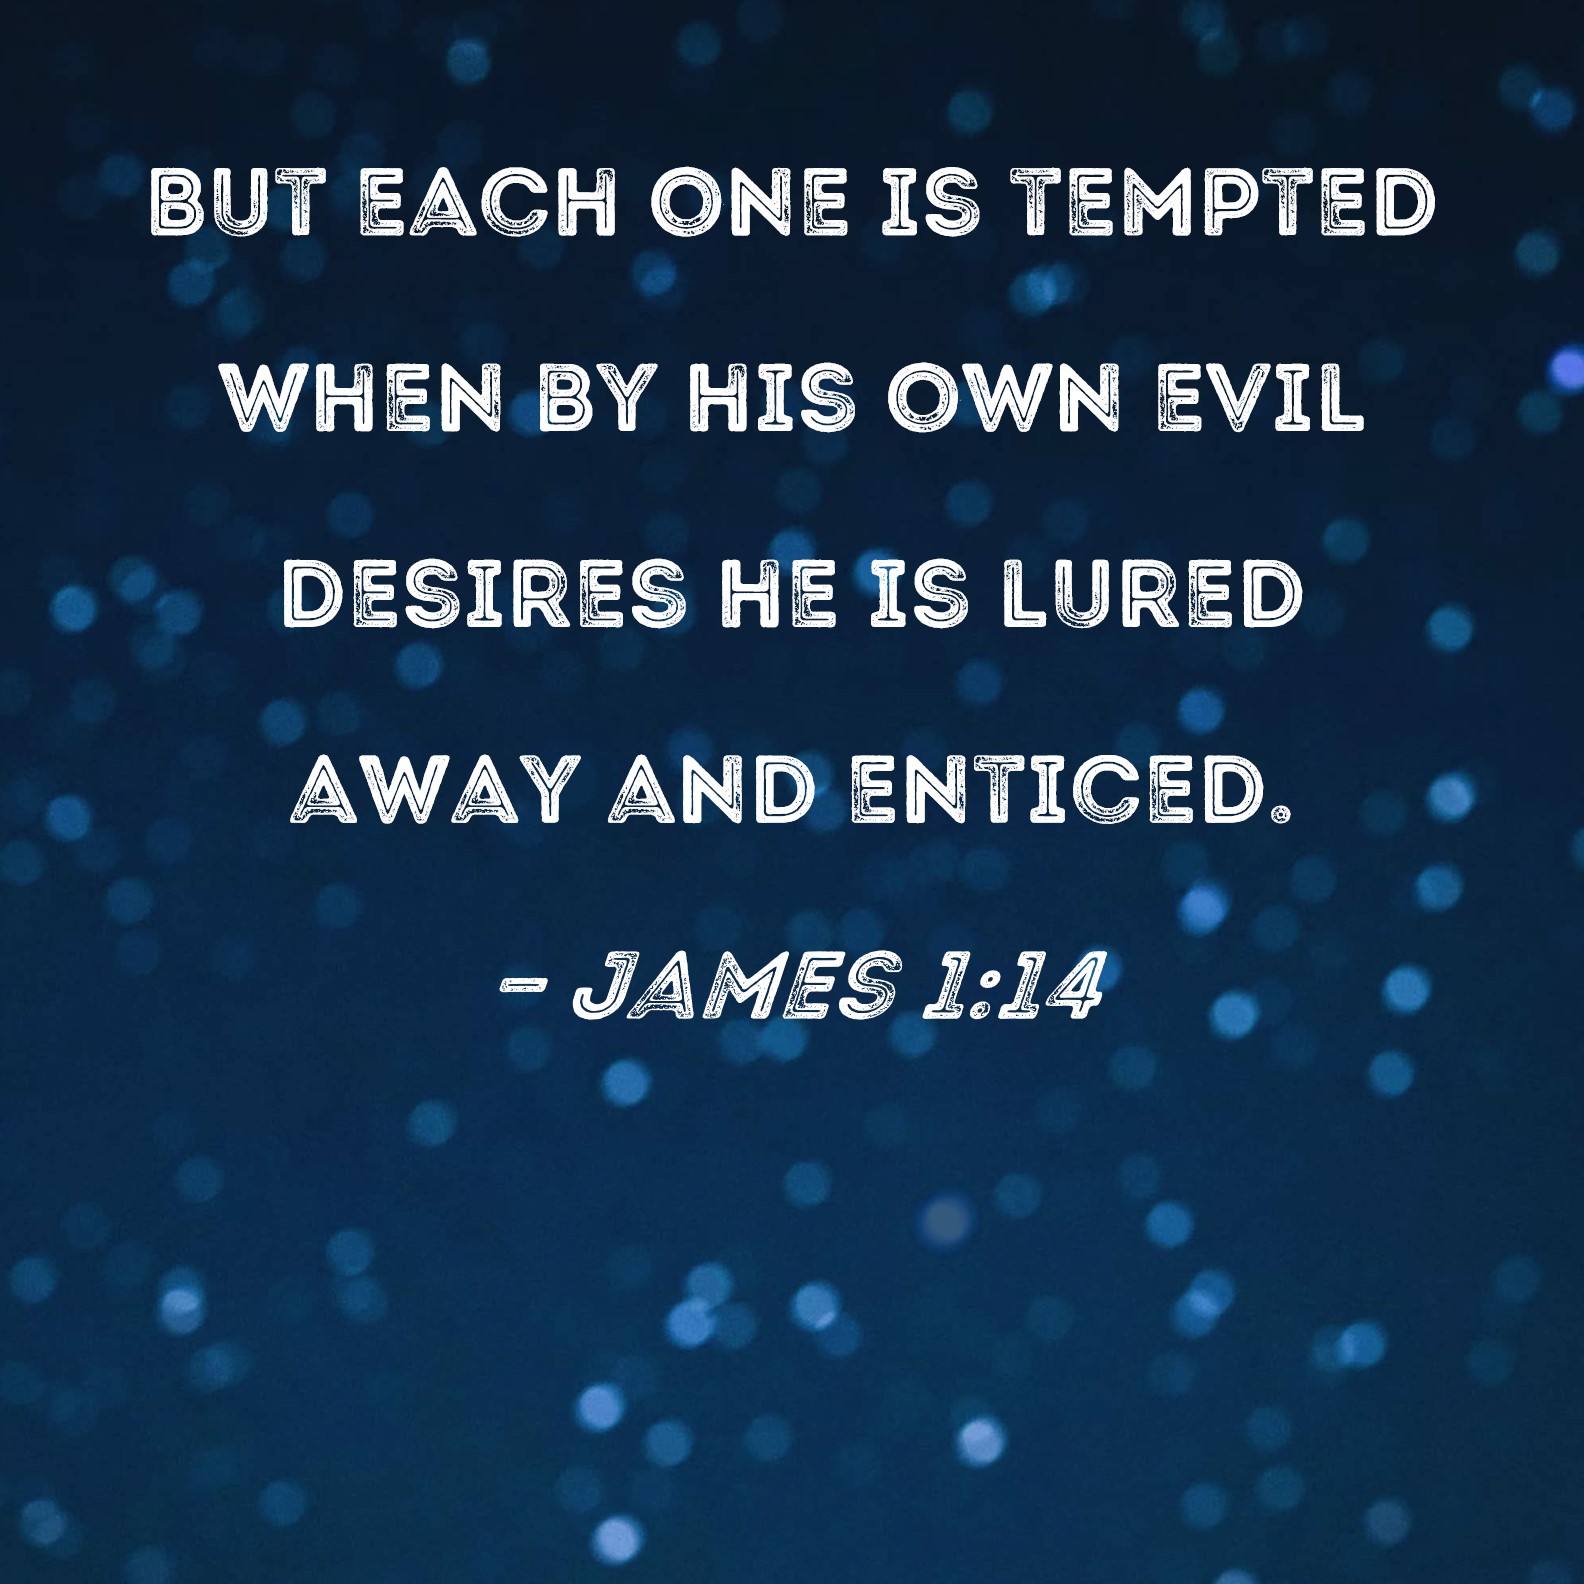 james-1-14-but-each-one-is-tempted-when-by-his-own-evil-desires-he-is